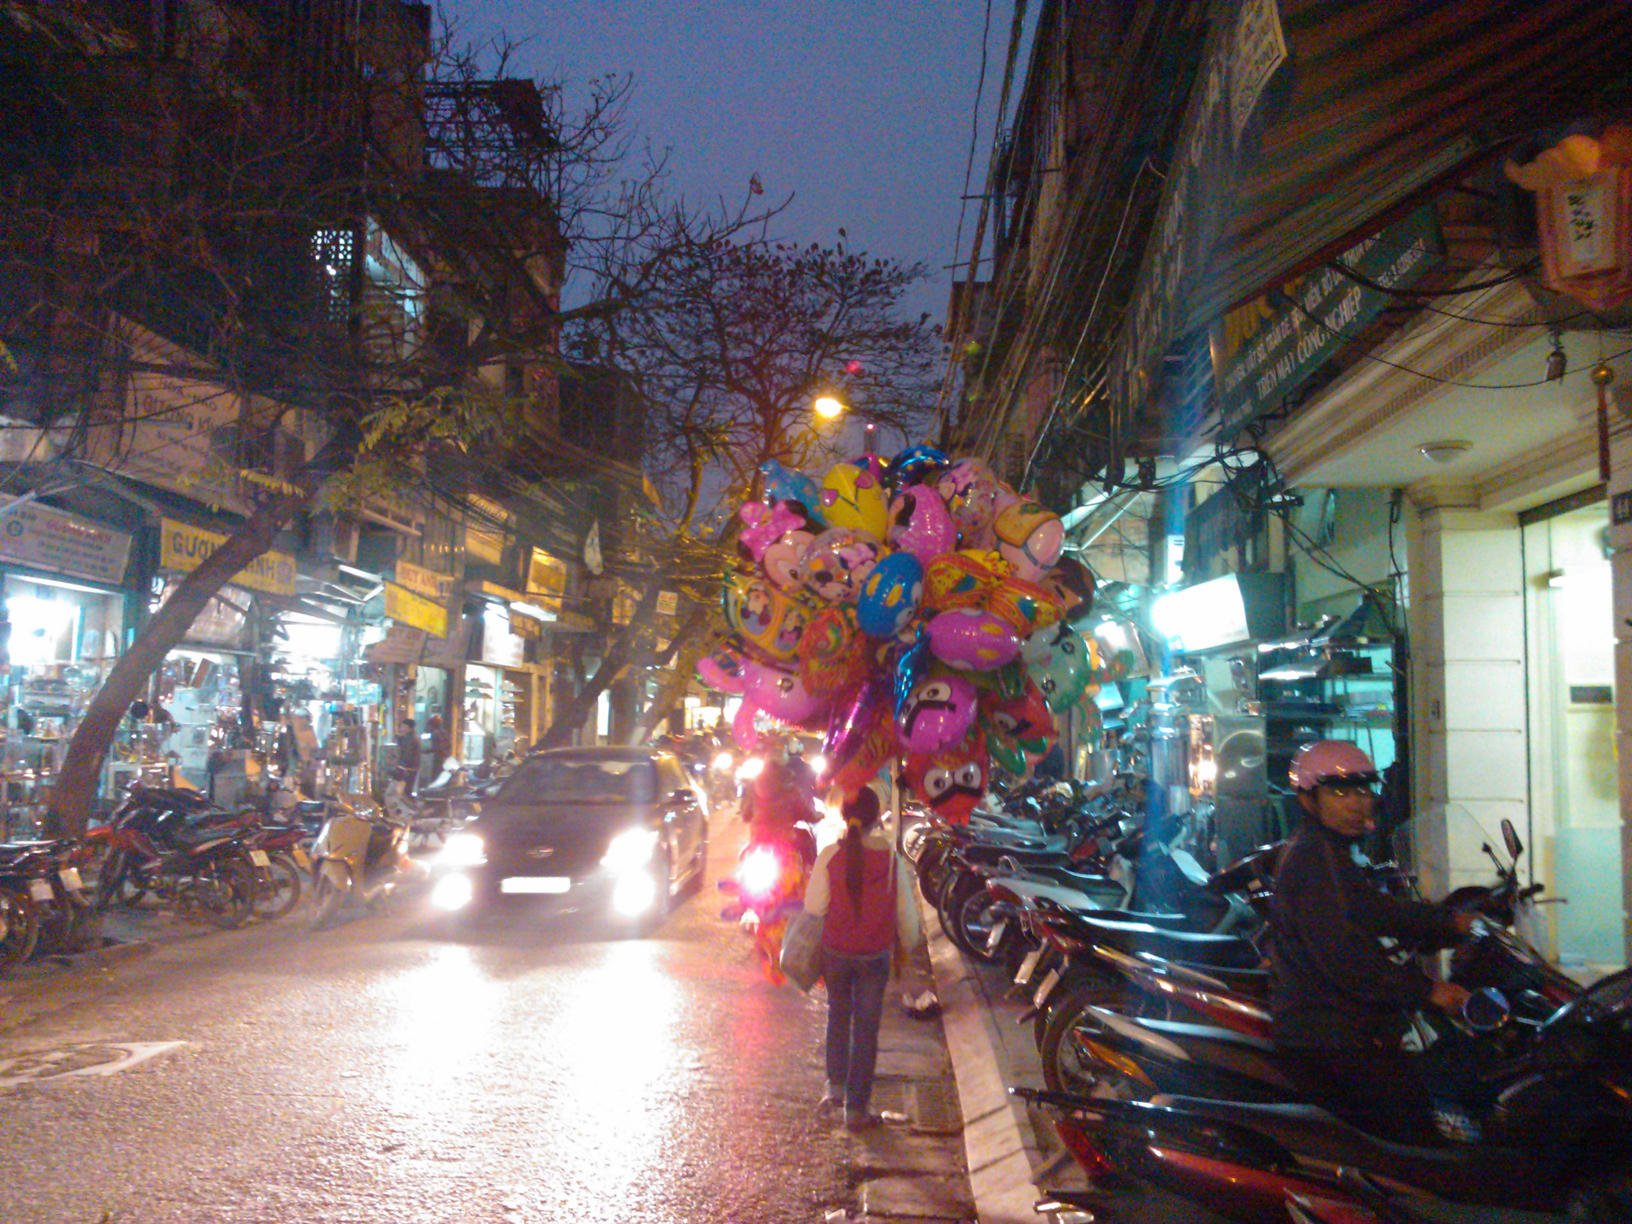 A young girl carrying balloons at night